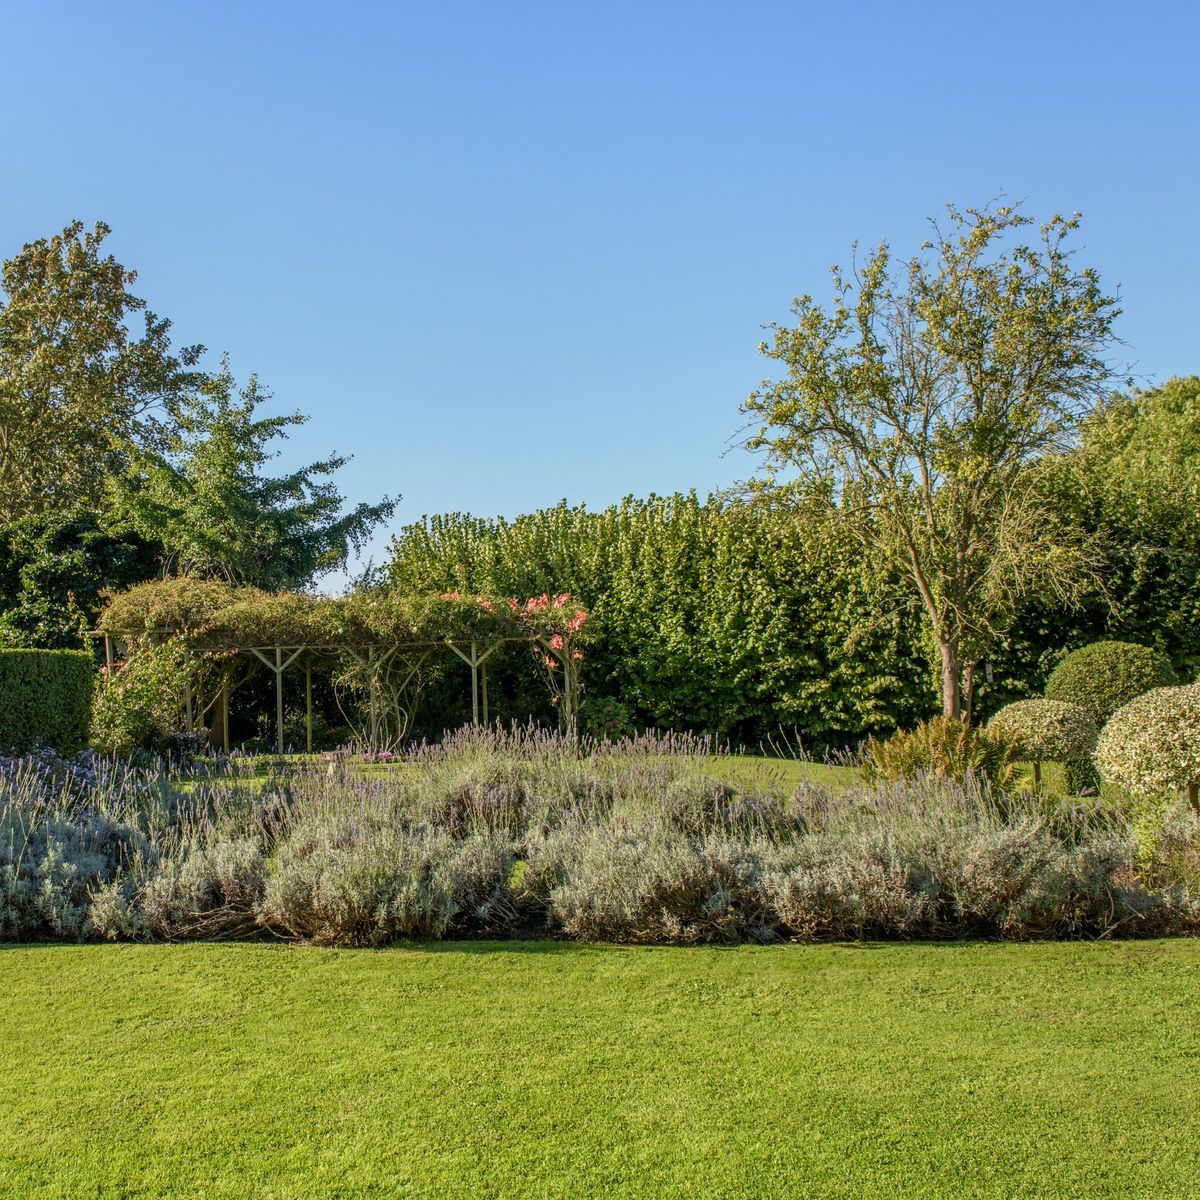 How to scarify a lawn – the expert-approved guide | Ideal Home